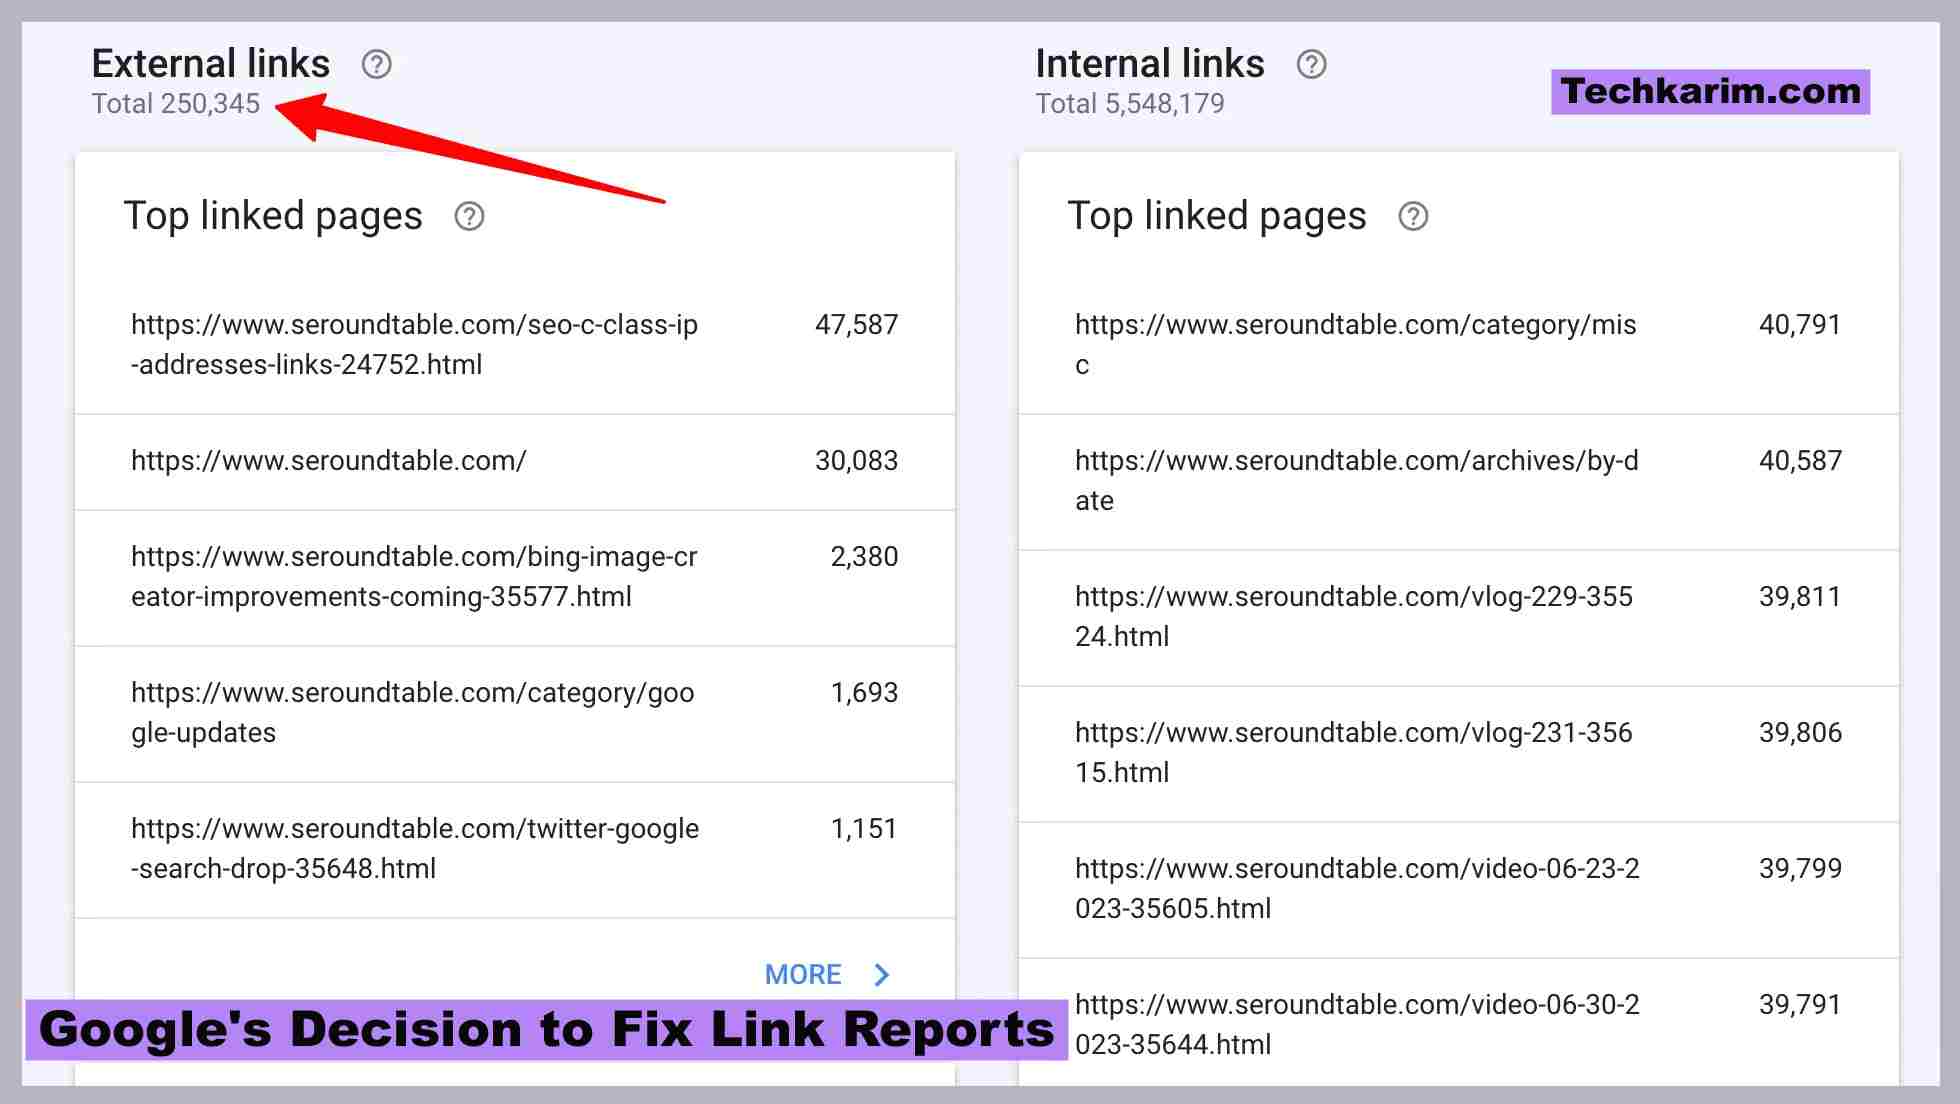 Google's Decision to Fix Link Reports